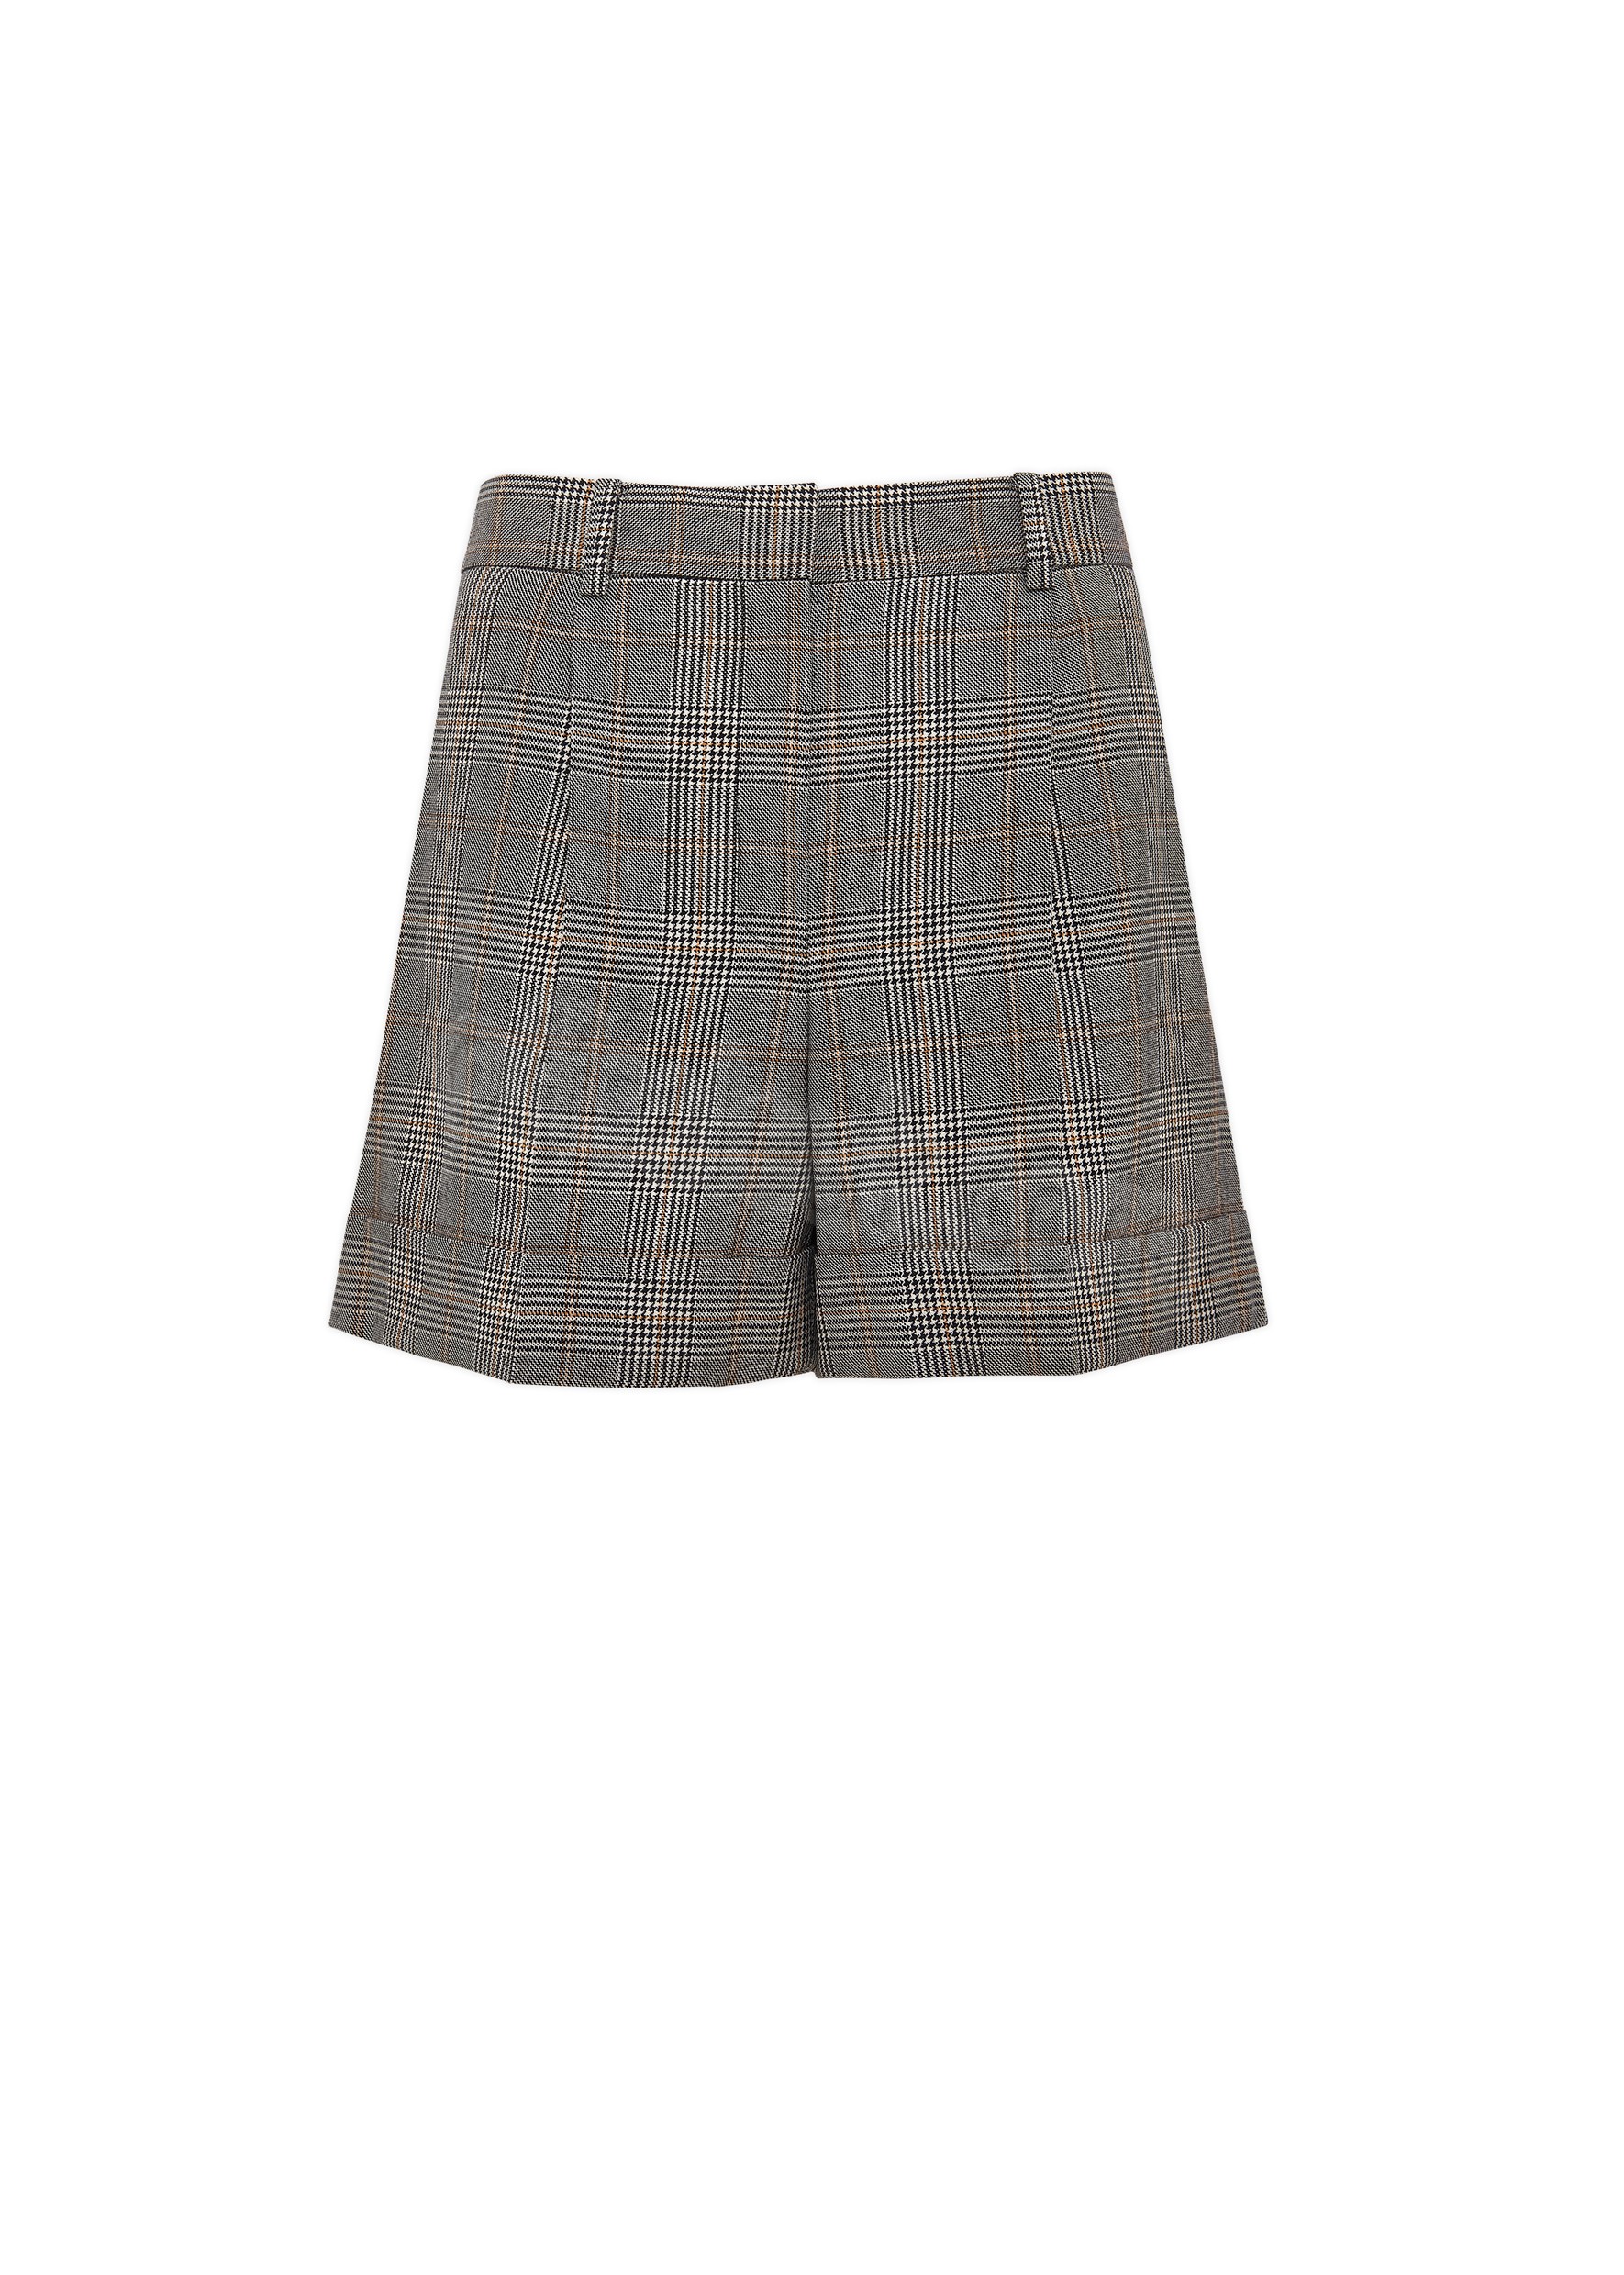 Discount Prince Of Wales Charlie Girl Short - Discount Prince Of Wales Charlie Girl Short